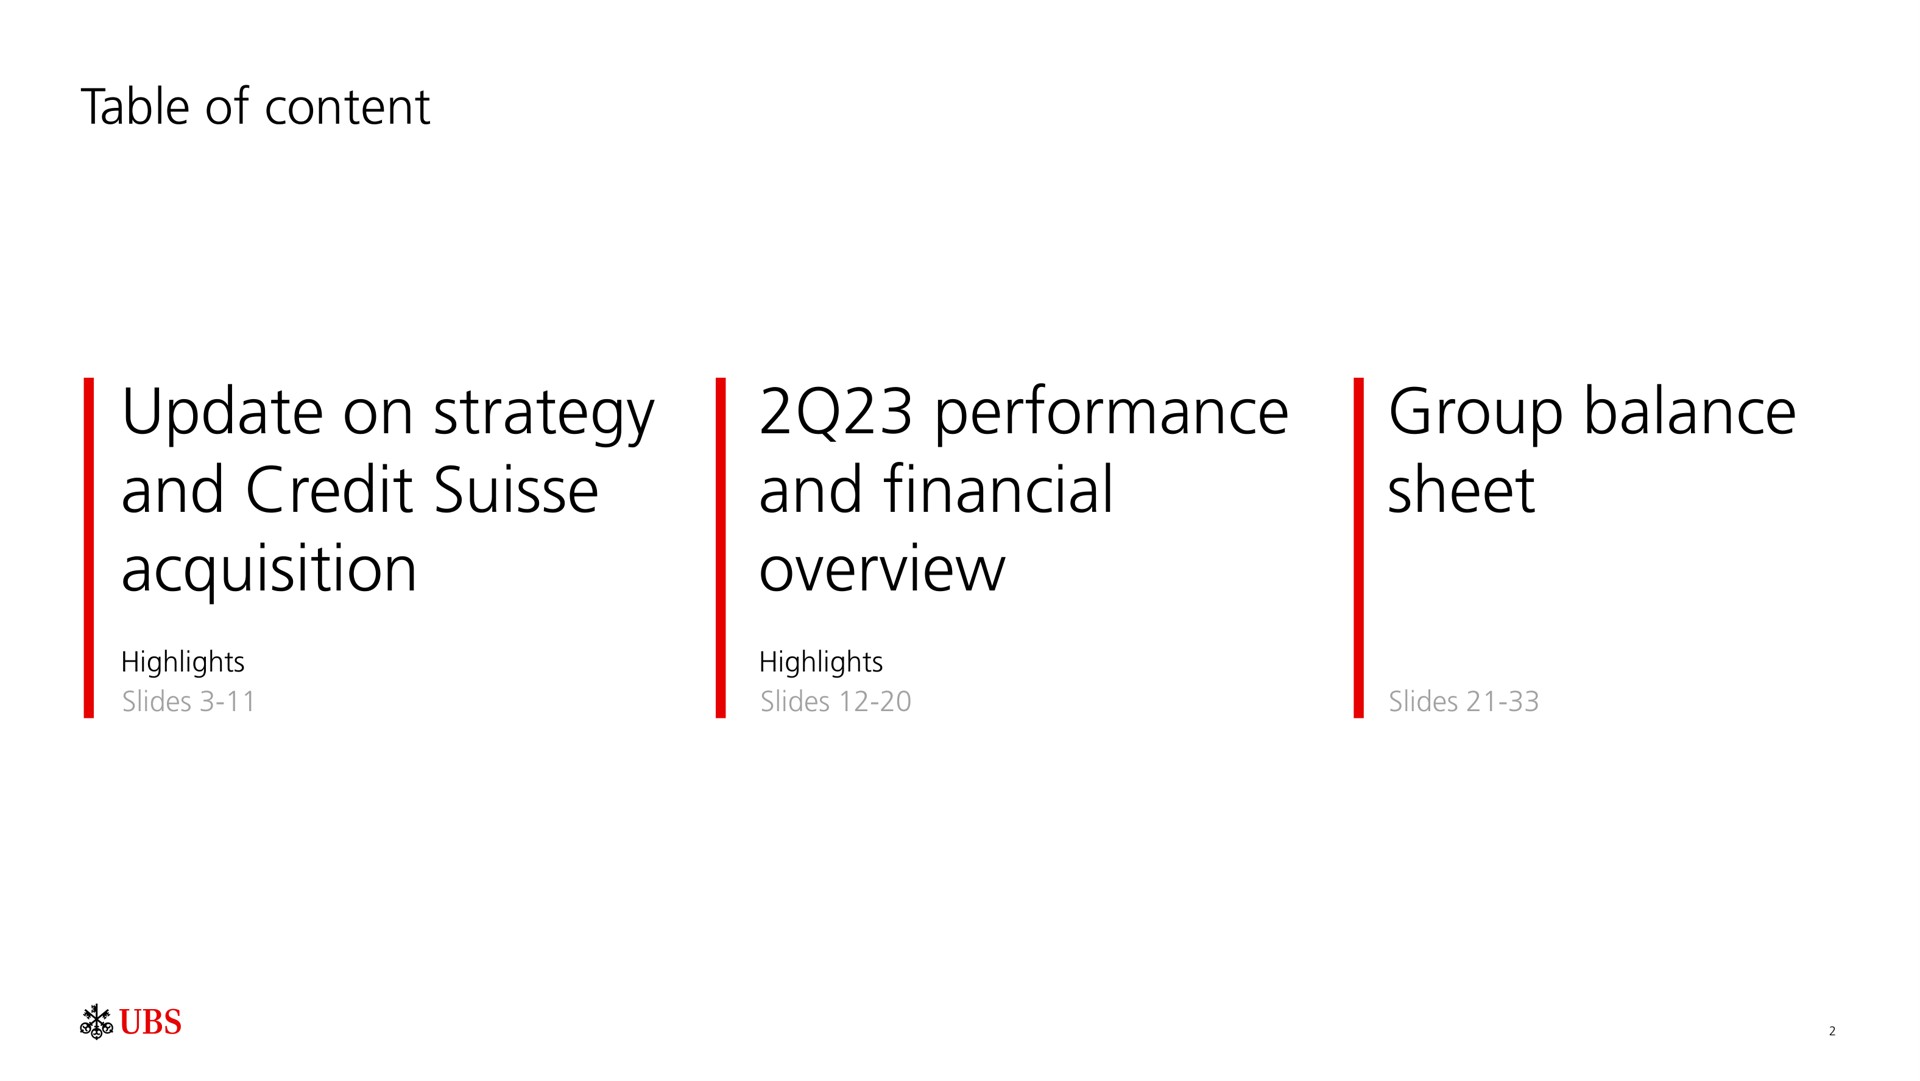 table of content update on strategy and credit acquisition performance and financial overview group balance sheet | UBS